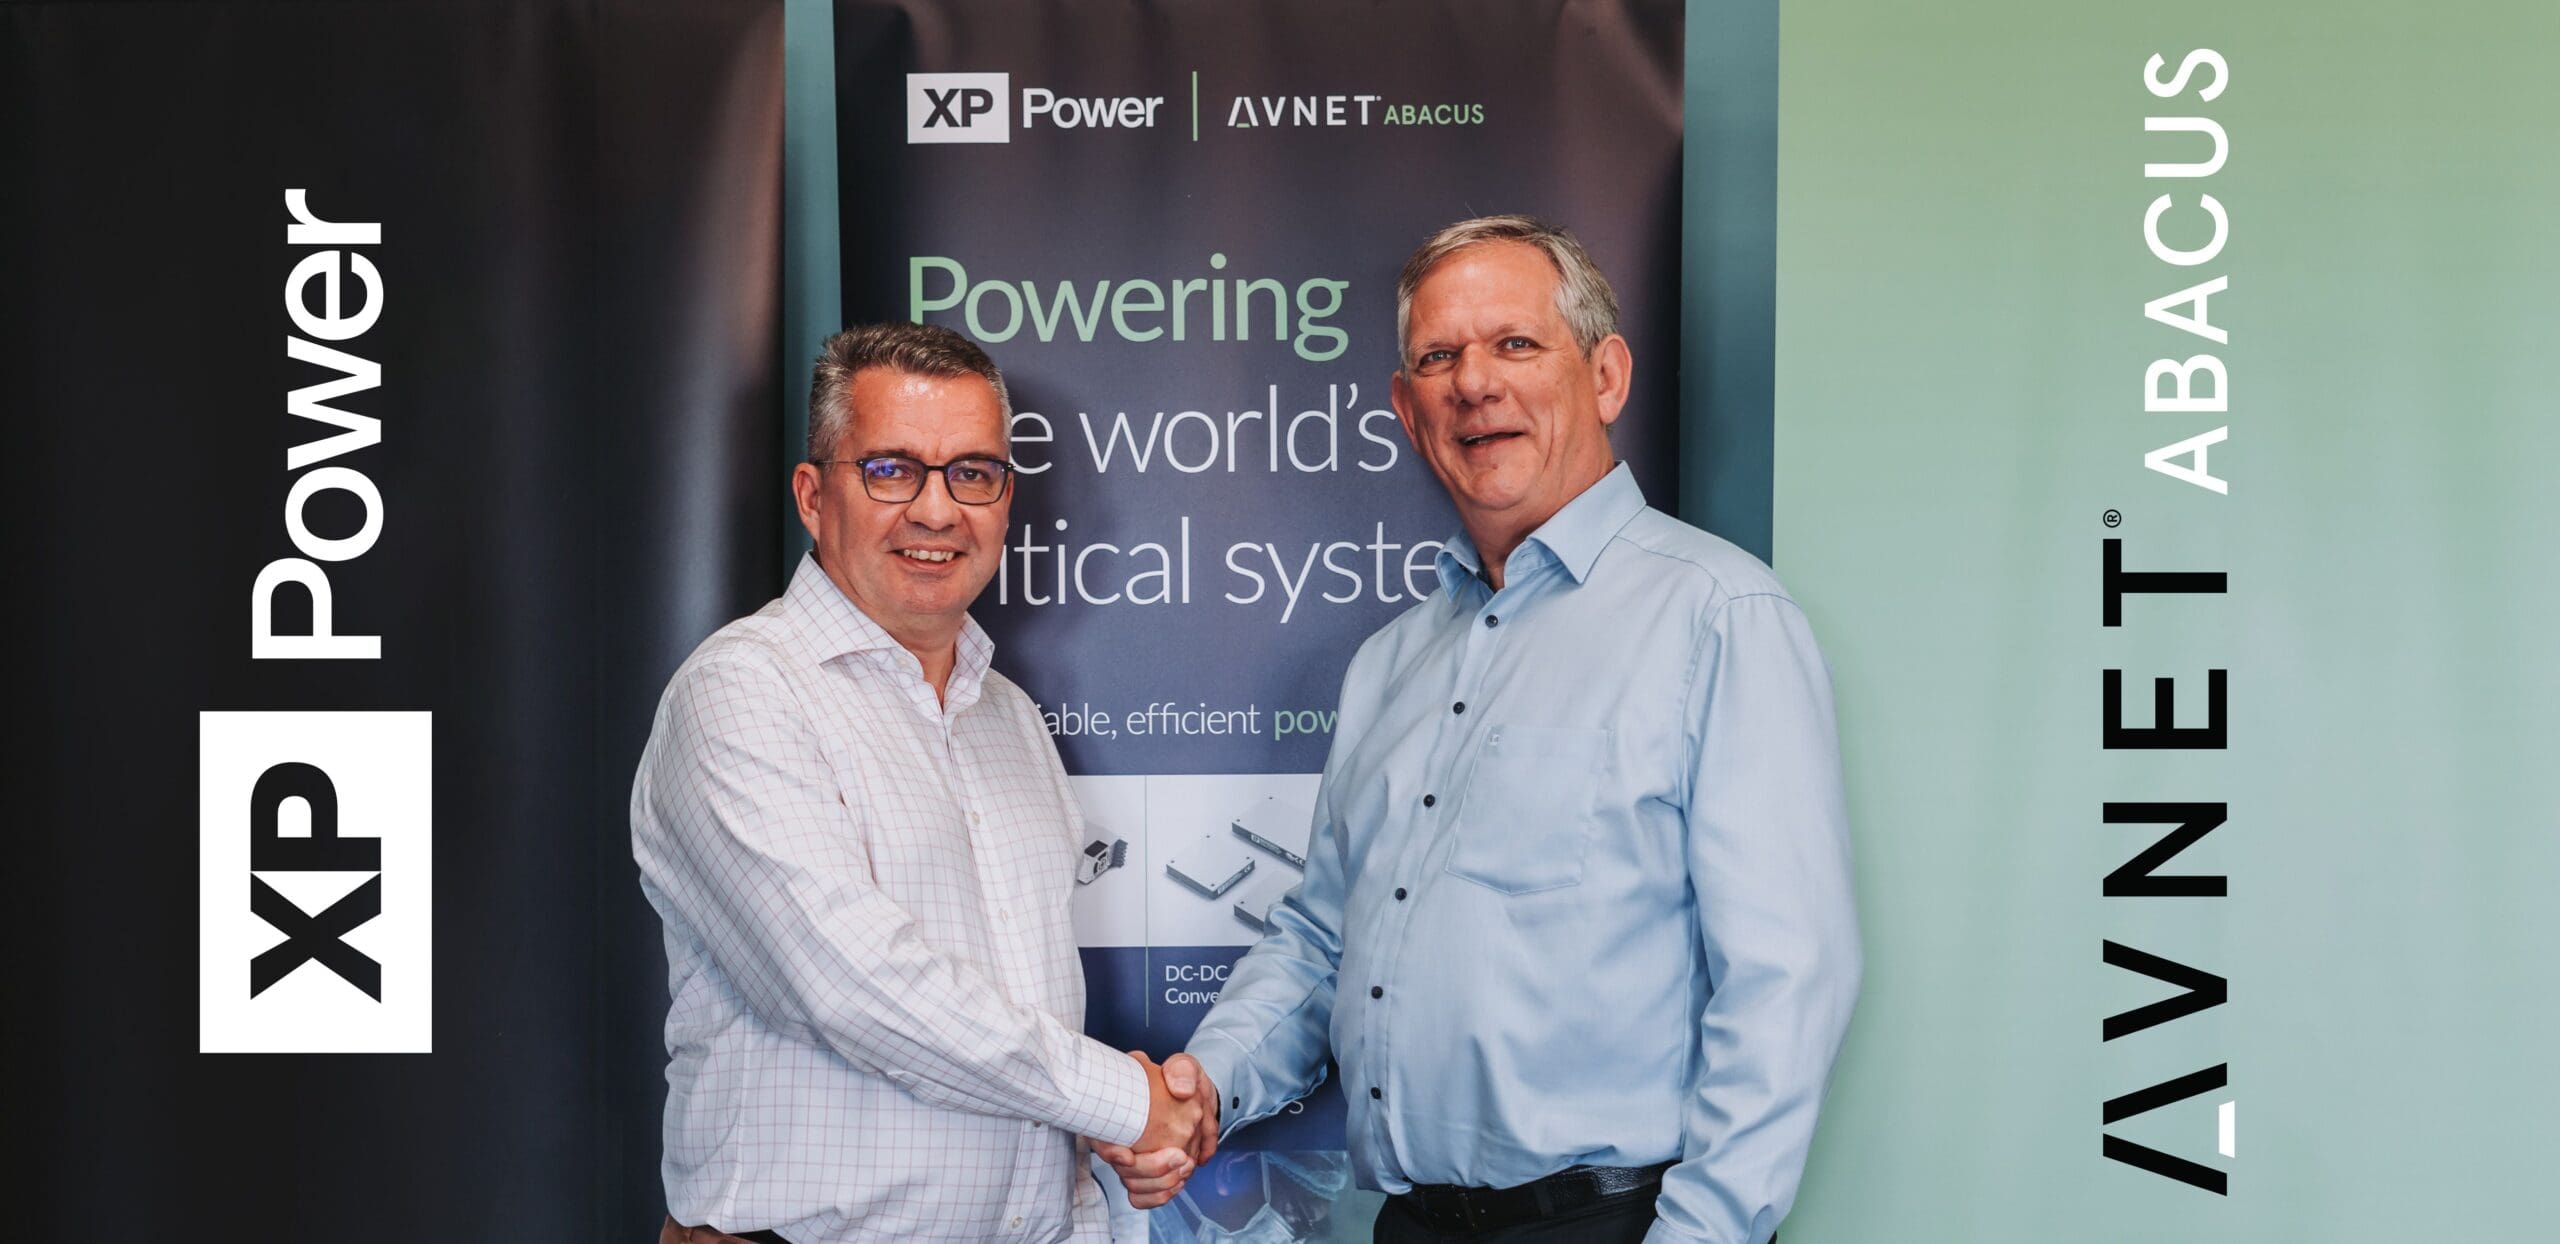 avnet abacus xppower